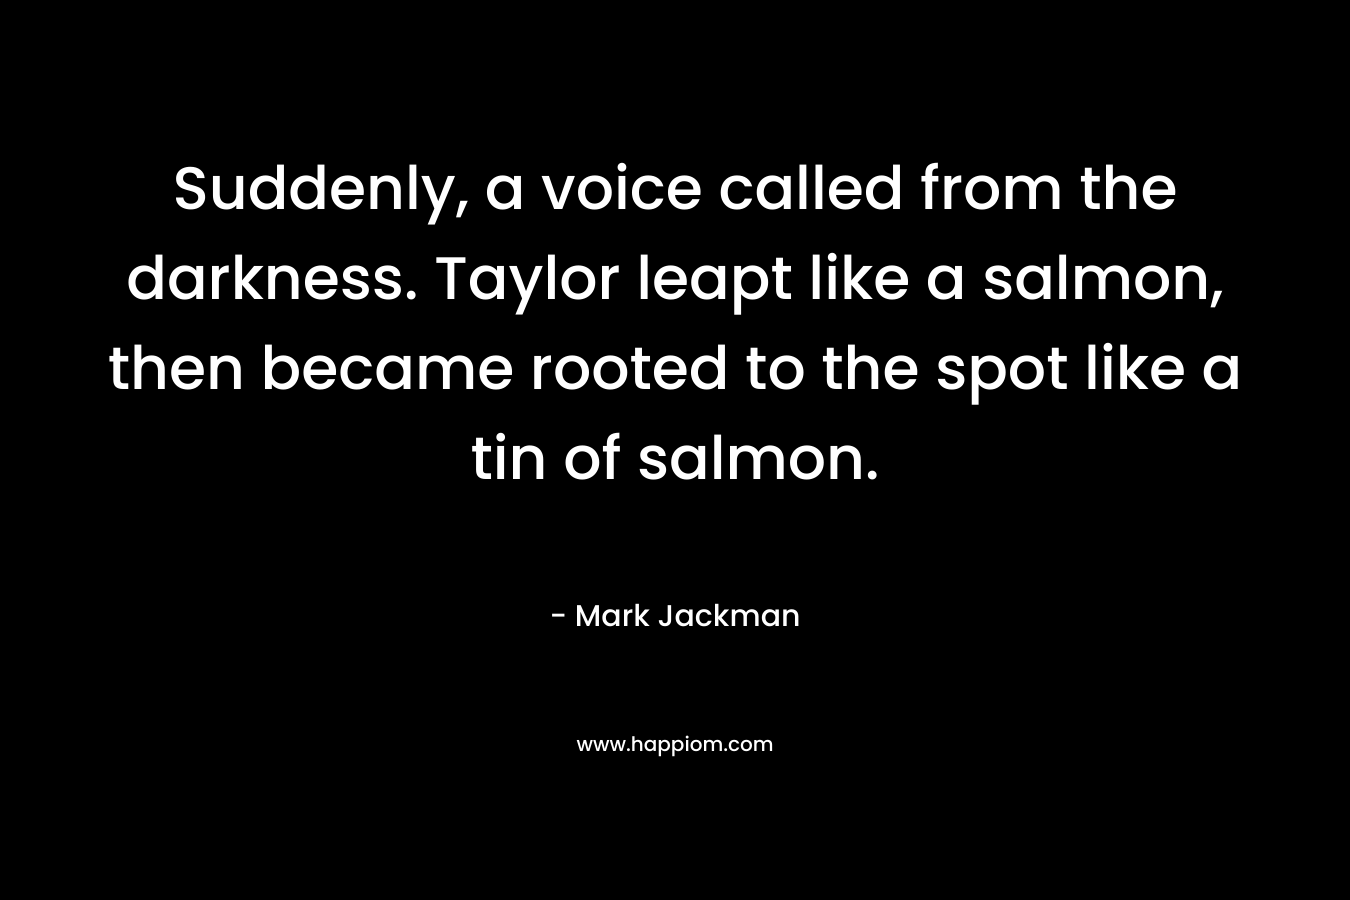 Suddenly, a voice called from the darkness. Taylor leapt like a salmon, then became rooted to the spot like a tin of salmon.